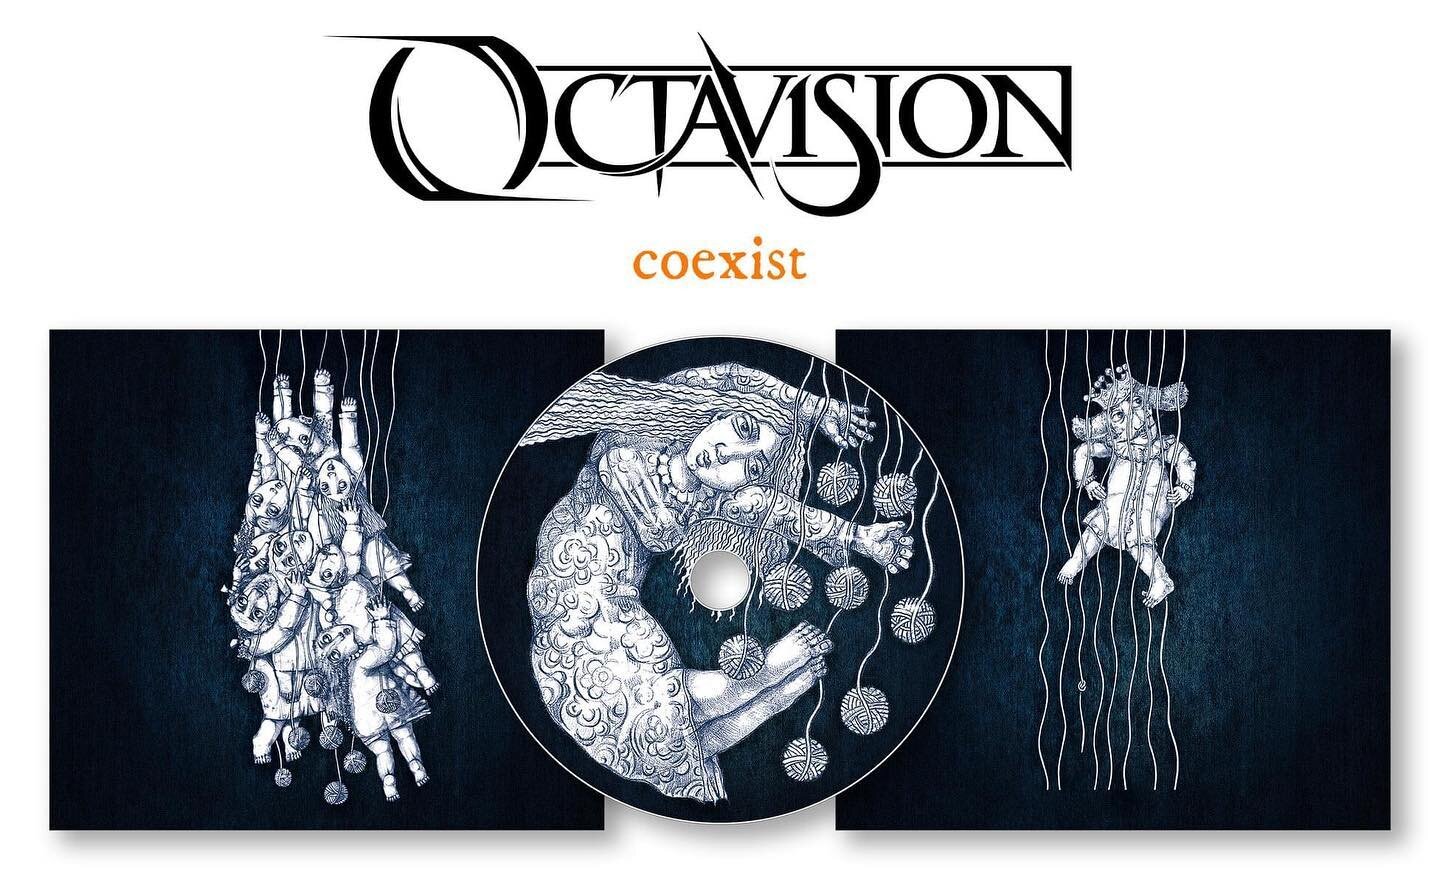 It's the Artwork release day!

Artist: @avetiskhachatryanart 

Full album &quot;Coexist&quot; will be released on December 29th, 2020.
The new single &quot;Coexist&quot; is now available on iTunes and Amazon Music.
2LP Vinyl Records will be on pre-or